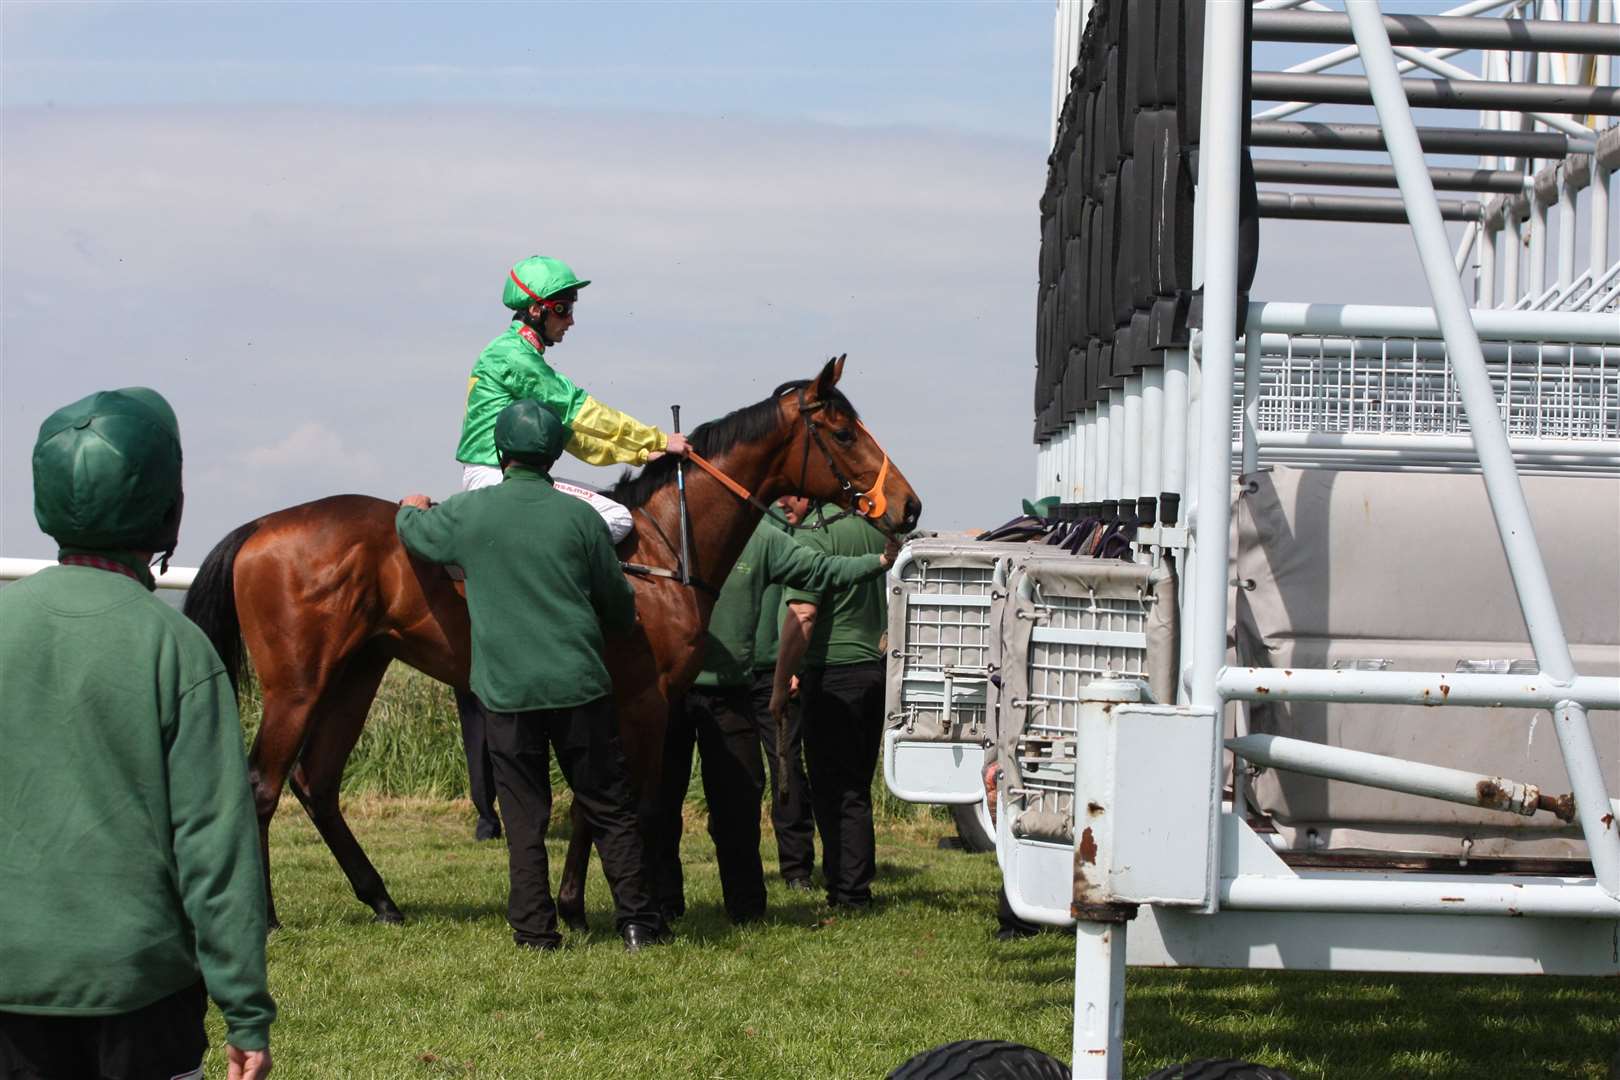 The charmingly-named Pullyourfingerout, a two-year-old bay colt, being encouraged into the stalls at Folkestone Racecourse in 2009. Picture: Chris Denham